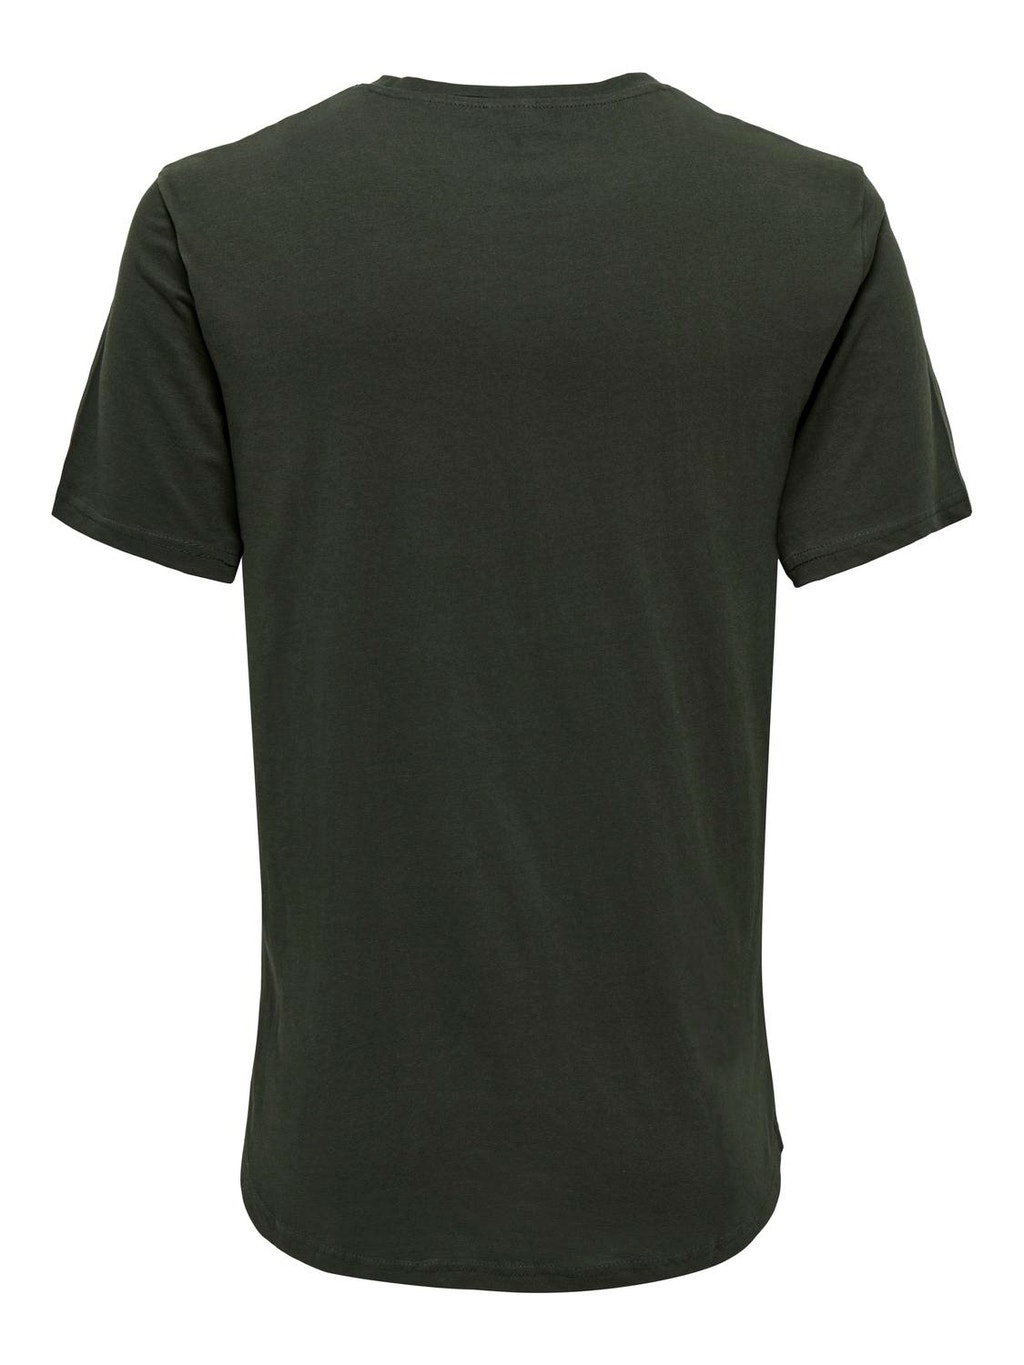 T-shirt Long Line Fit Paricollo | Dark Green | ONLY & SONS®